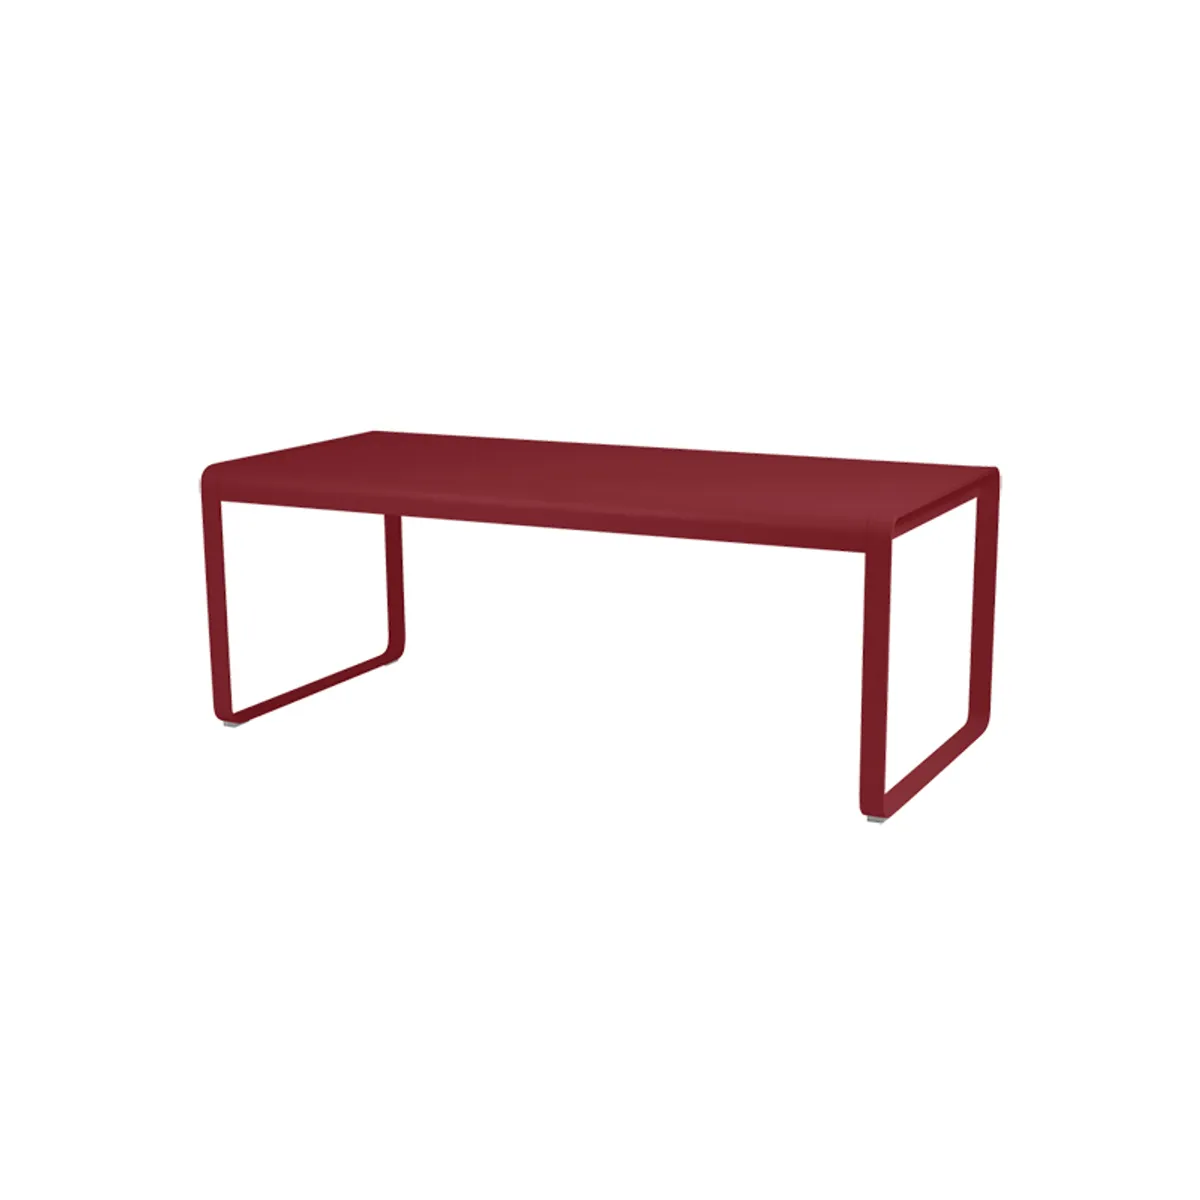 Bellevie Outdoor Table For Restaurants And Hotels Red